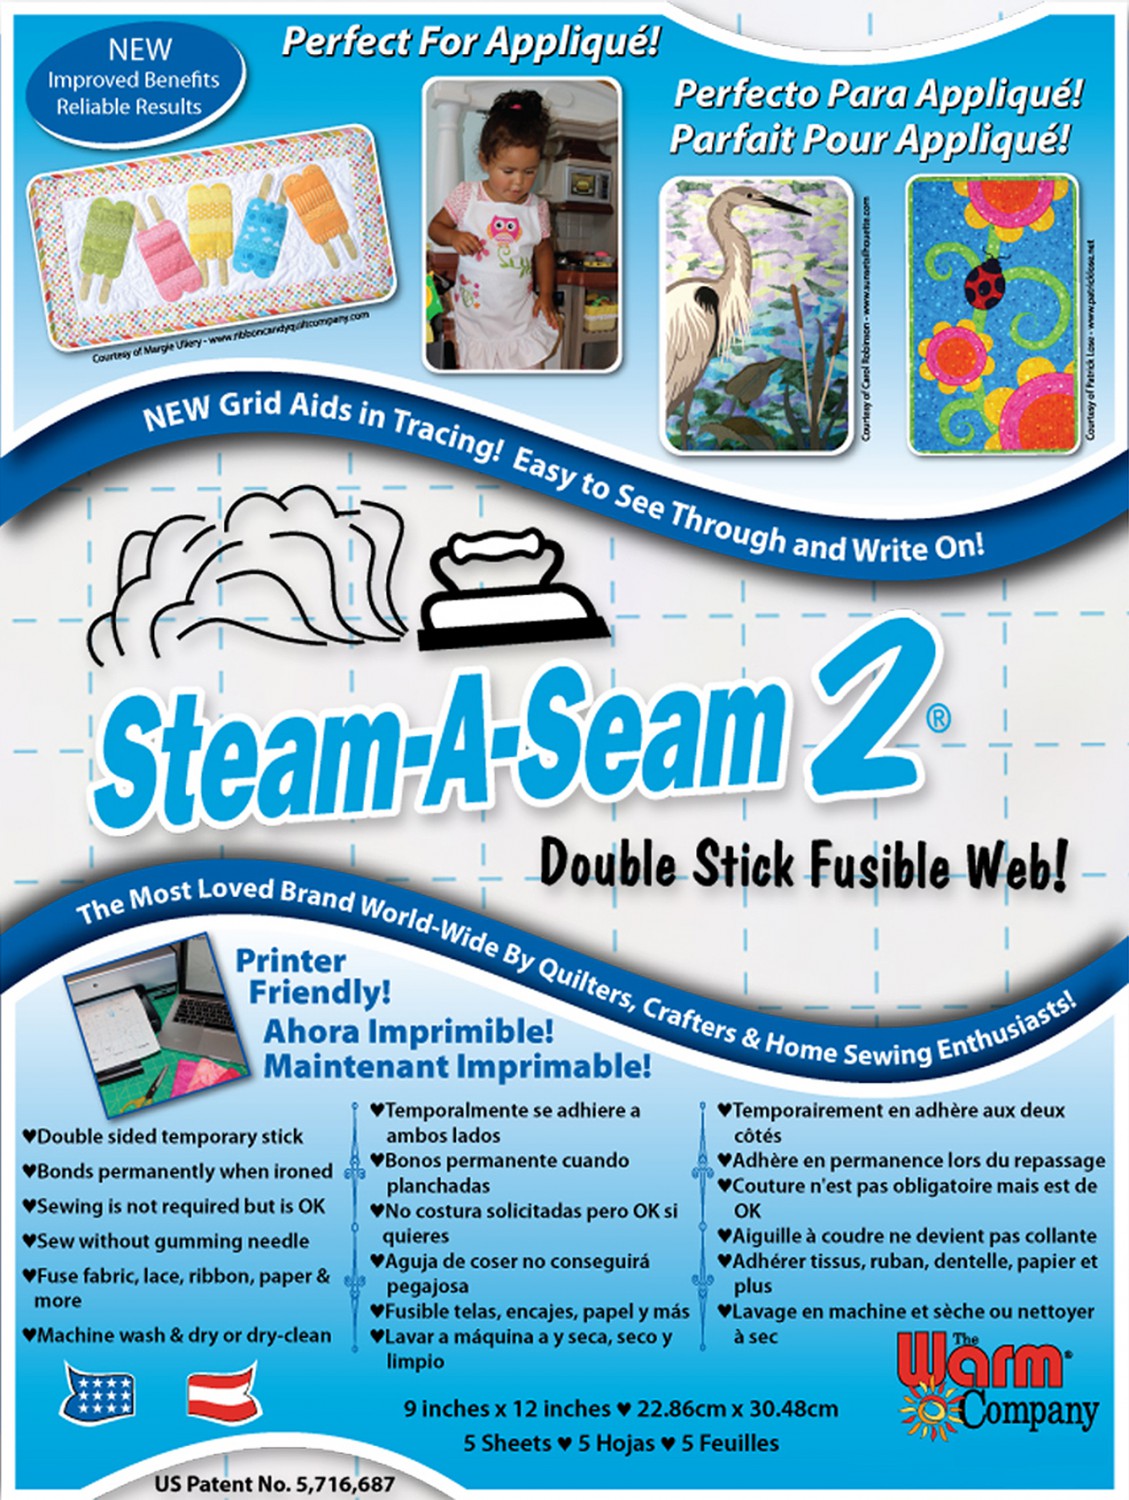 Steam-A-Seam 2  Double Stick Fusible Web 9in x 12in 5ct from Warm Company